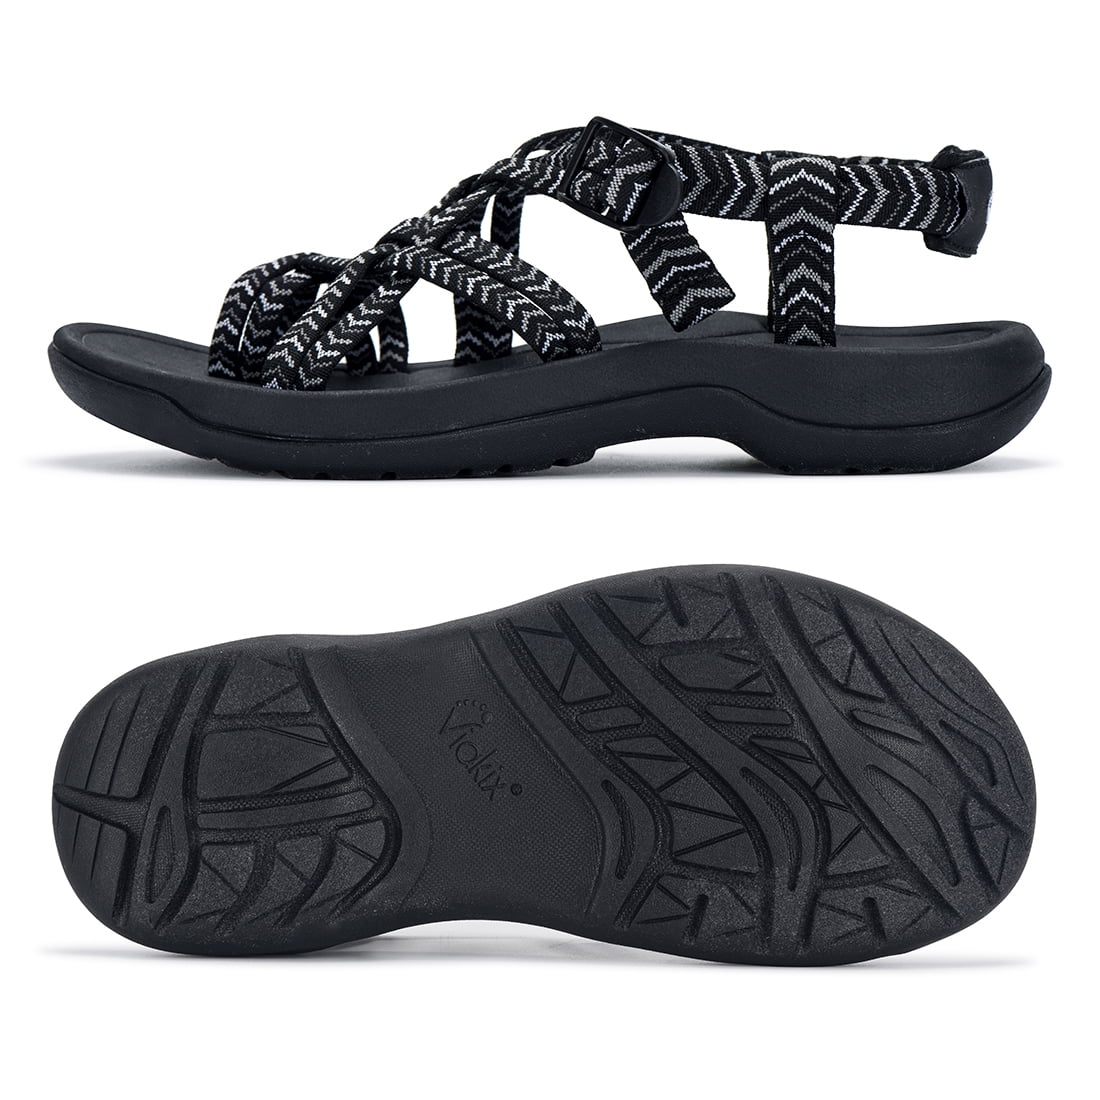 athletic flip flops with arch support